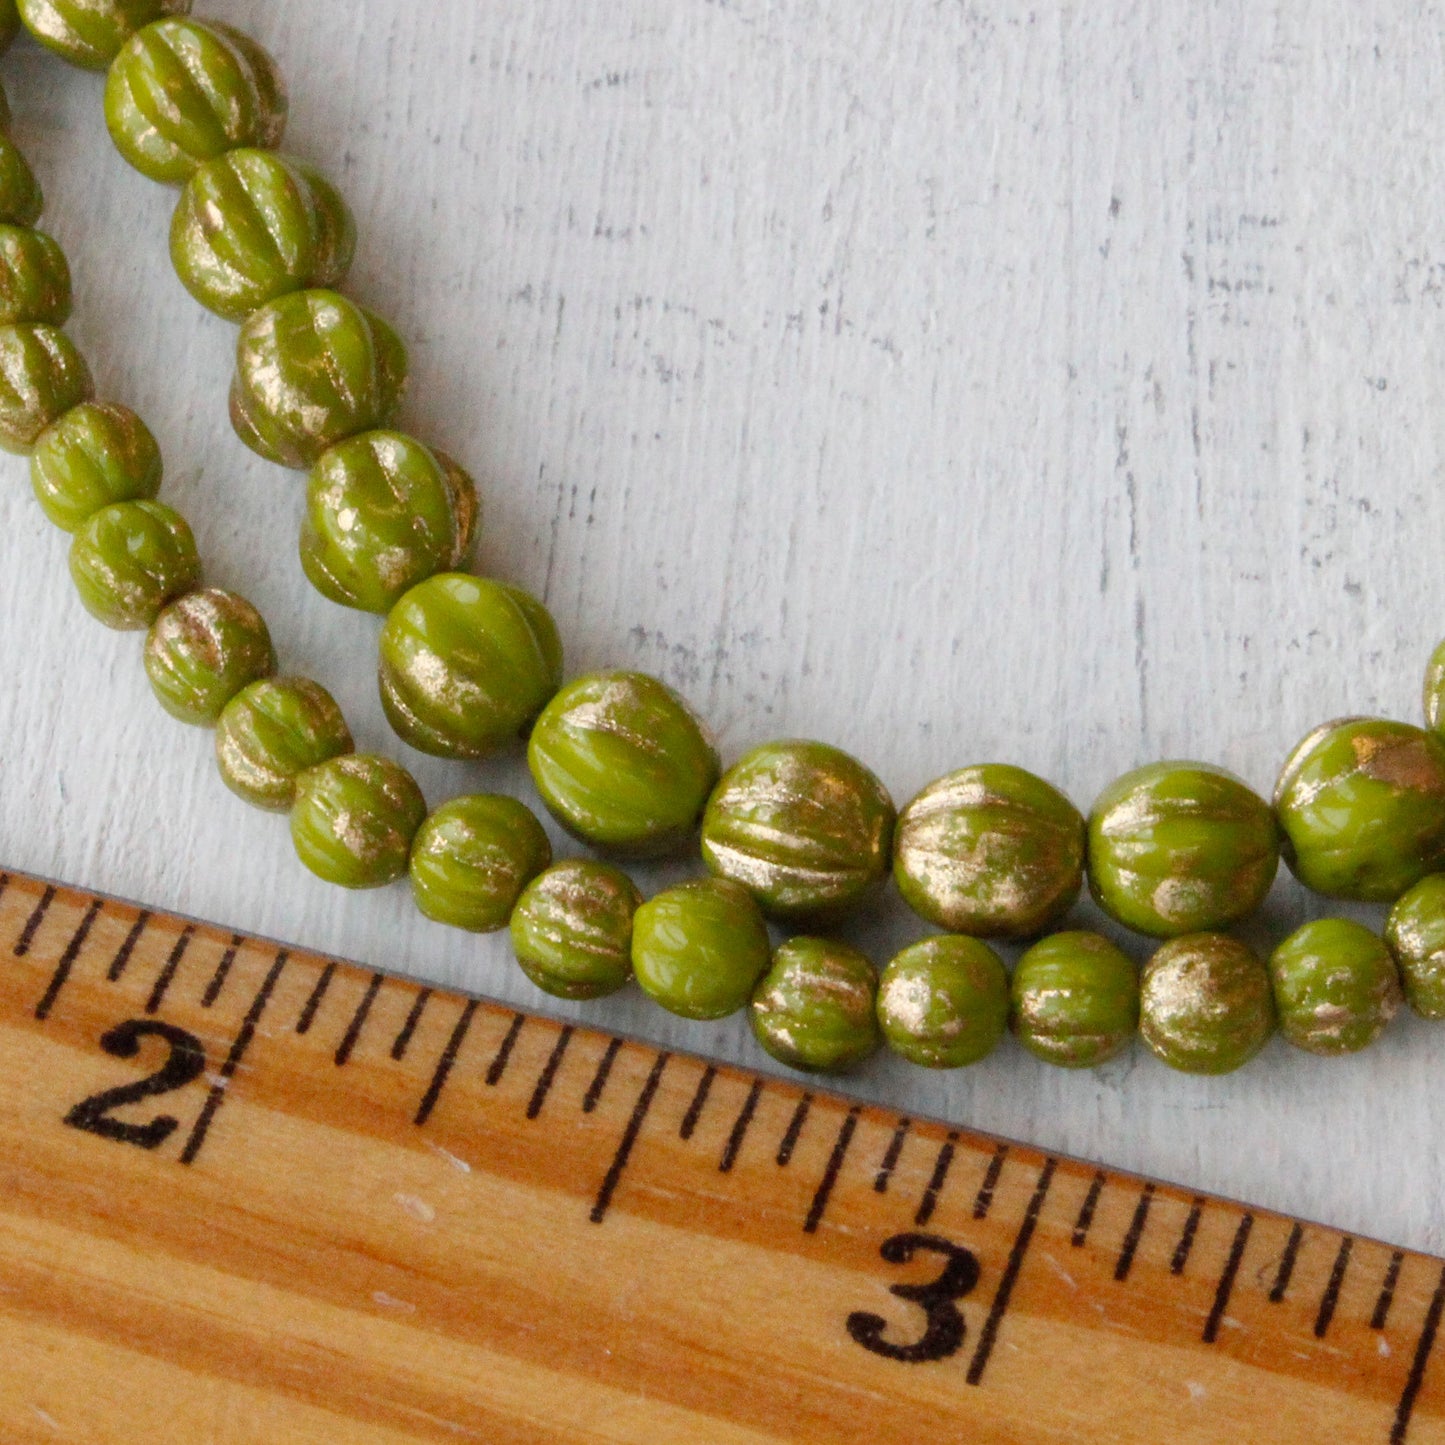 4mm Melon Beads - Green with Gold Dust - 50 Beads